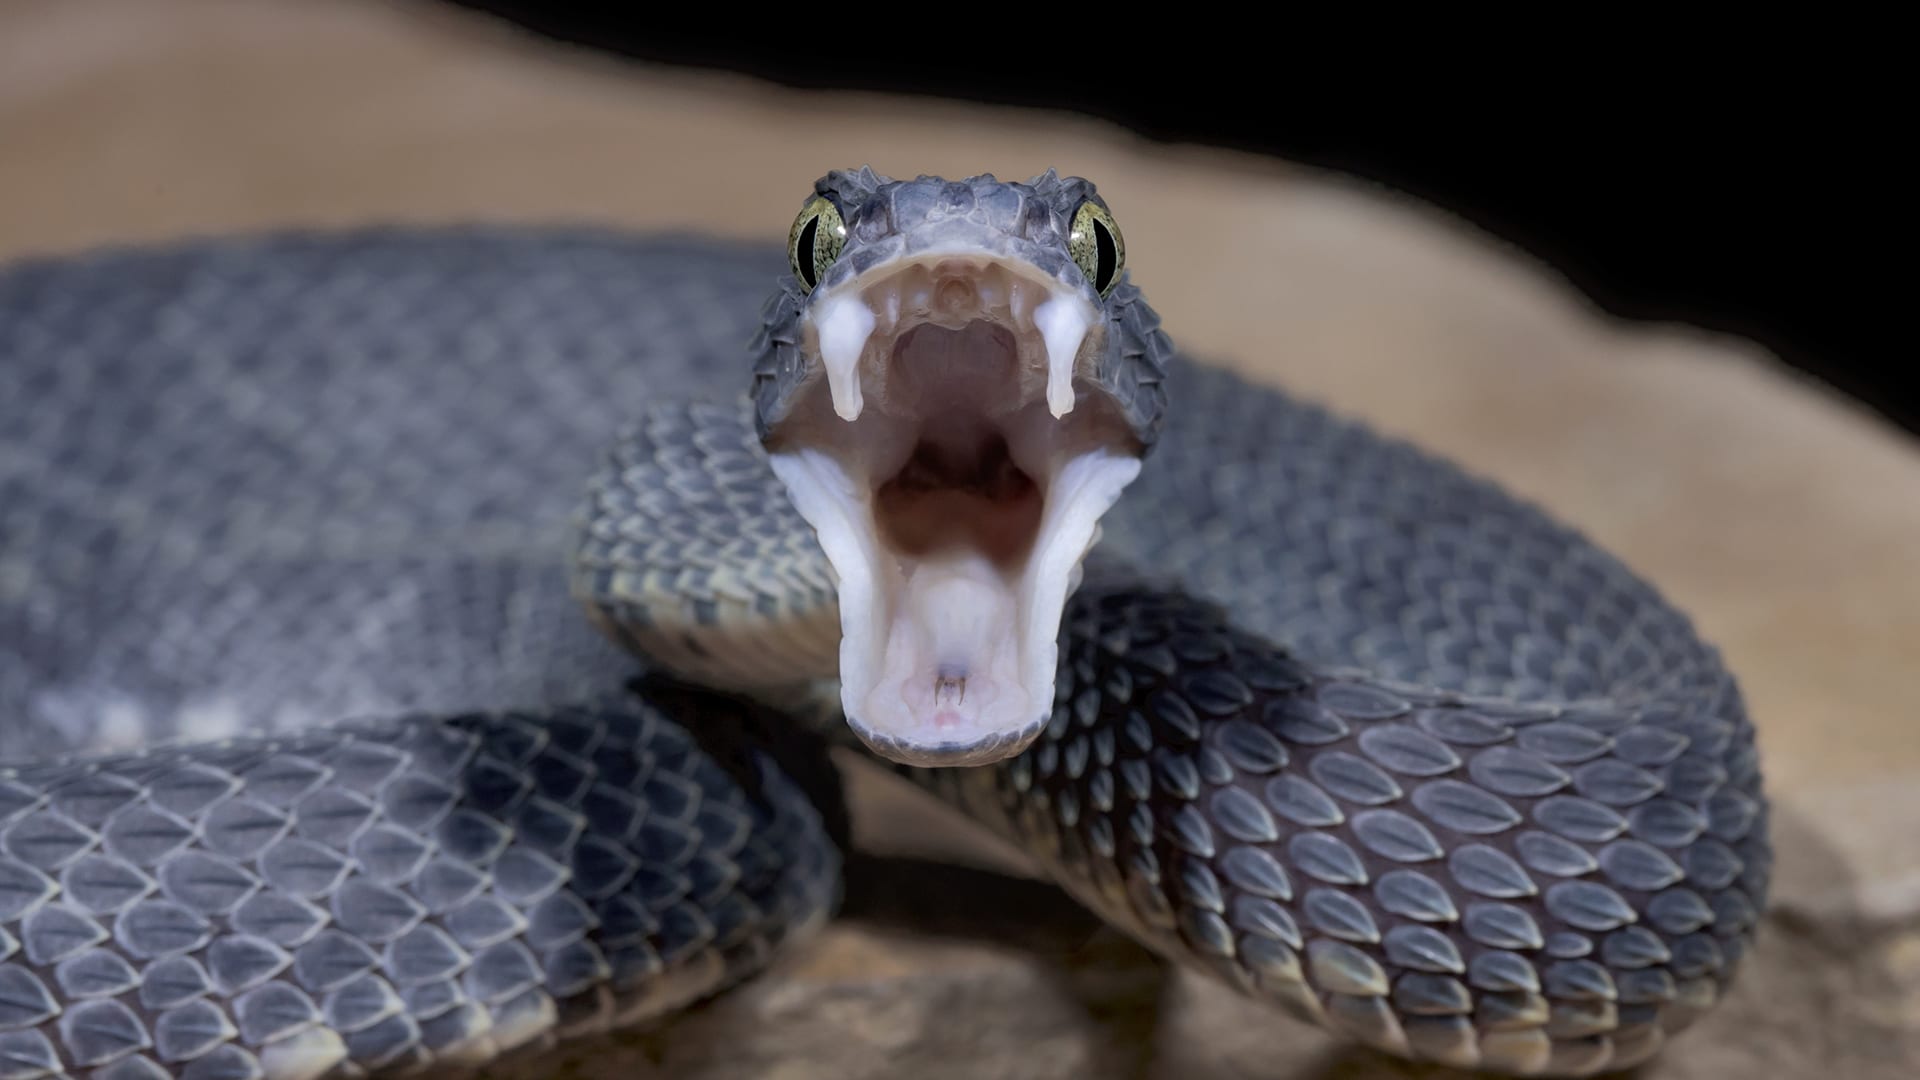 You Have 15 Questions to Prove You Have a Ton of General Knowledge Venomous Snakes Istock Mark Kostich